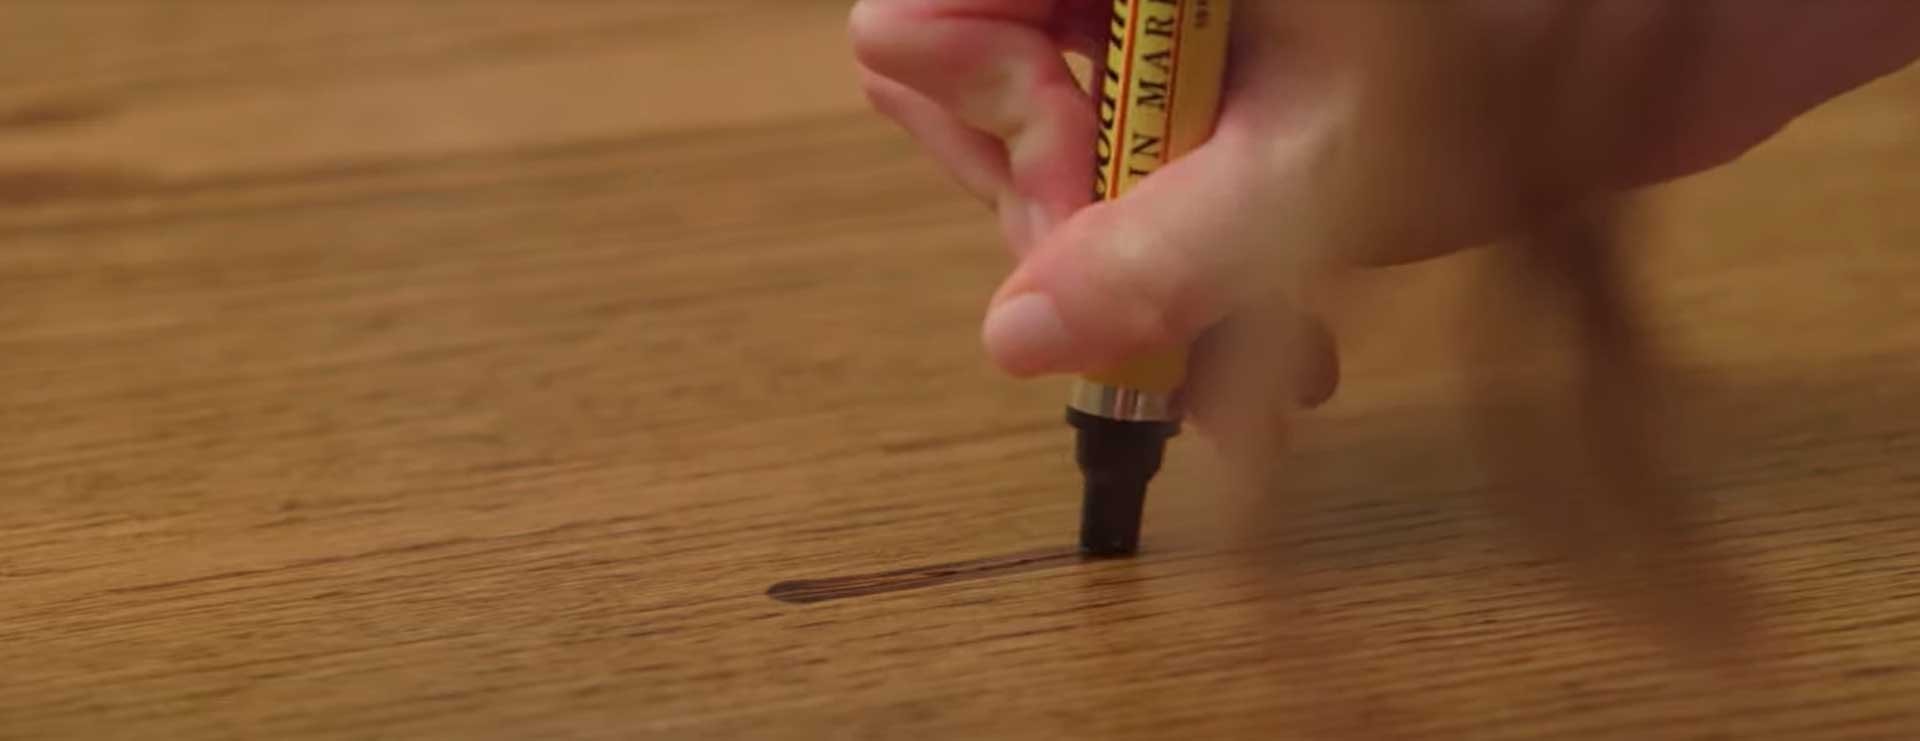 fixing scratch with a stain marker